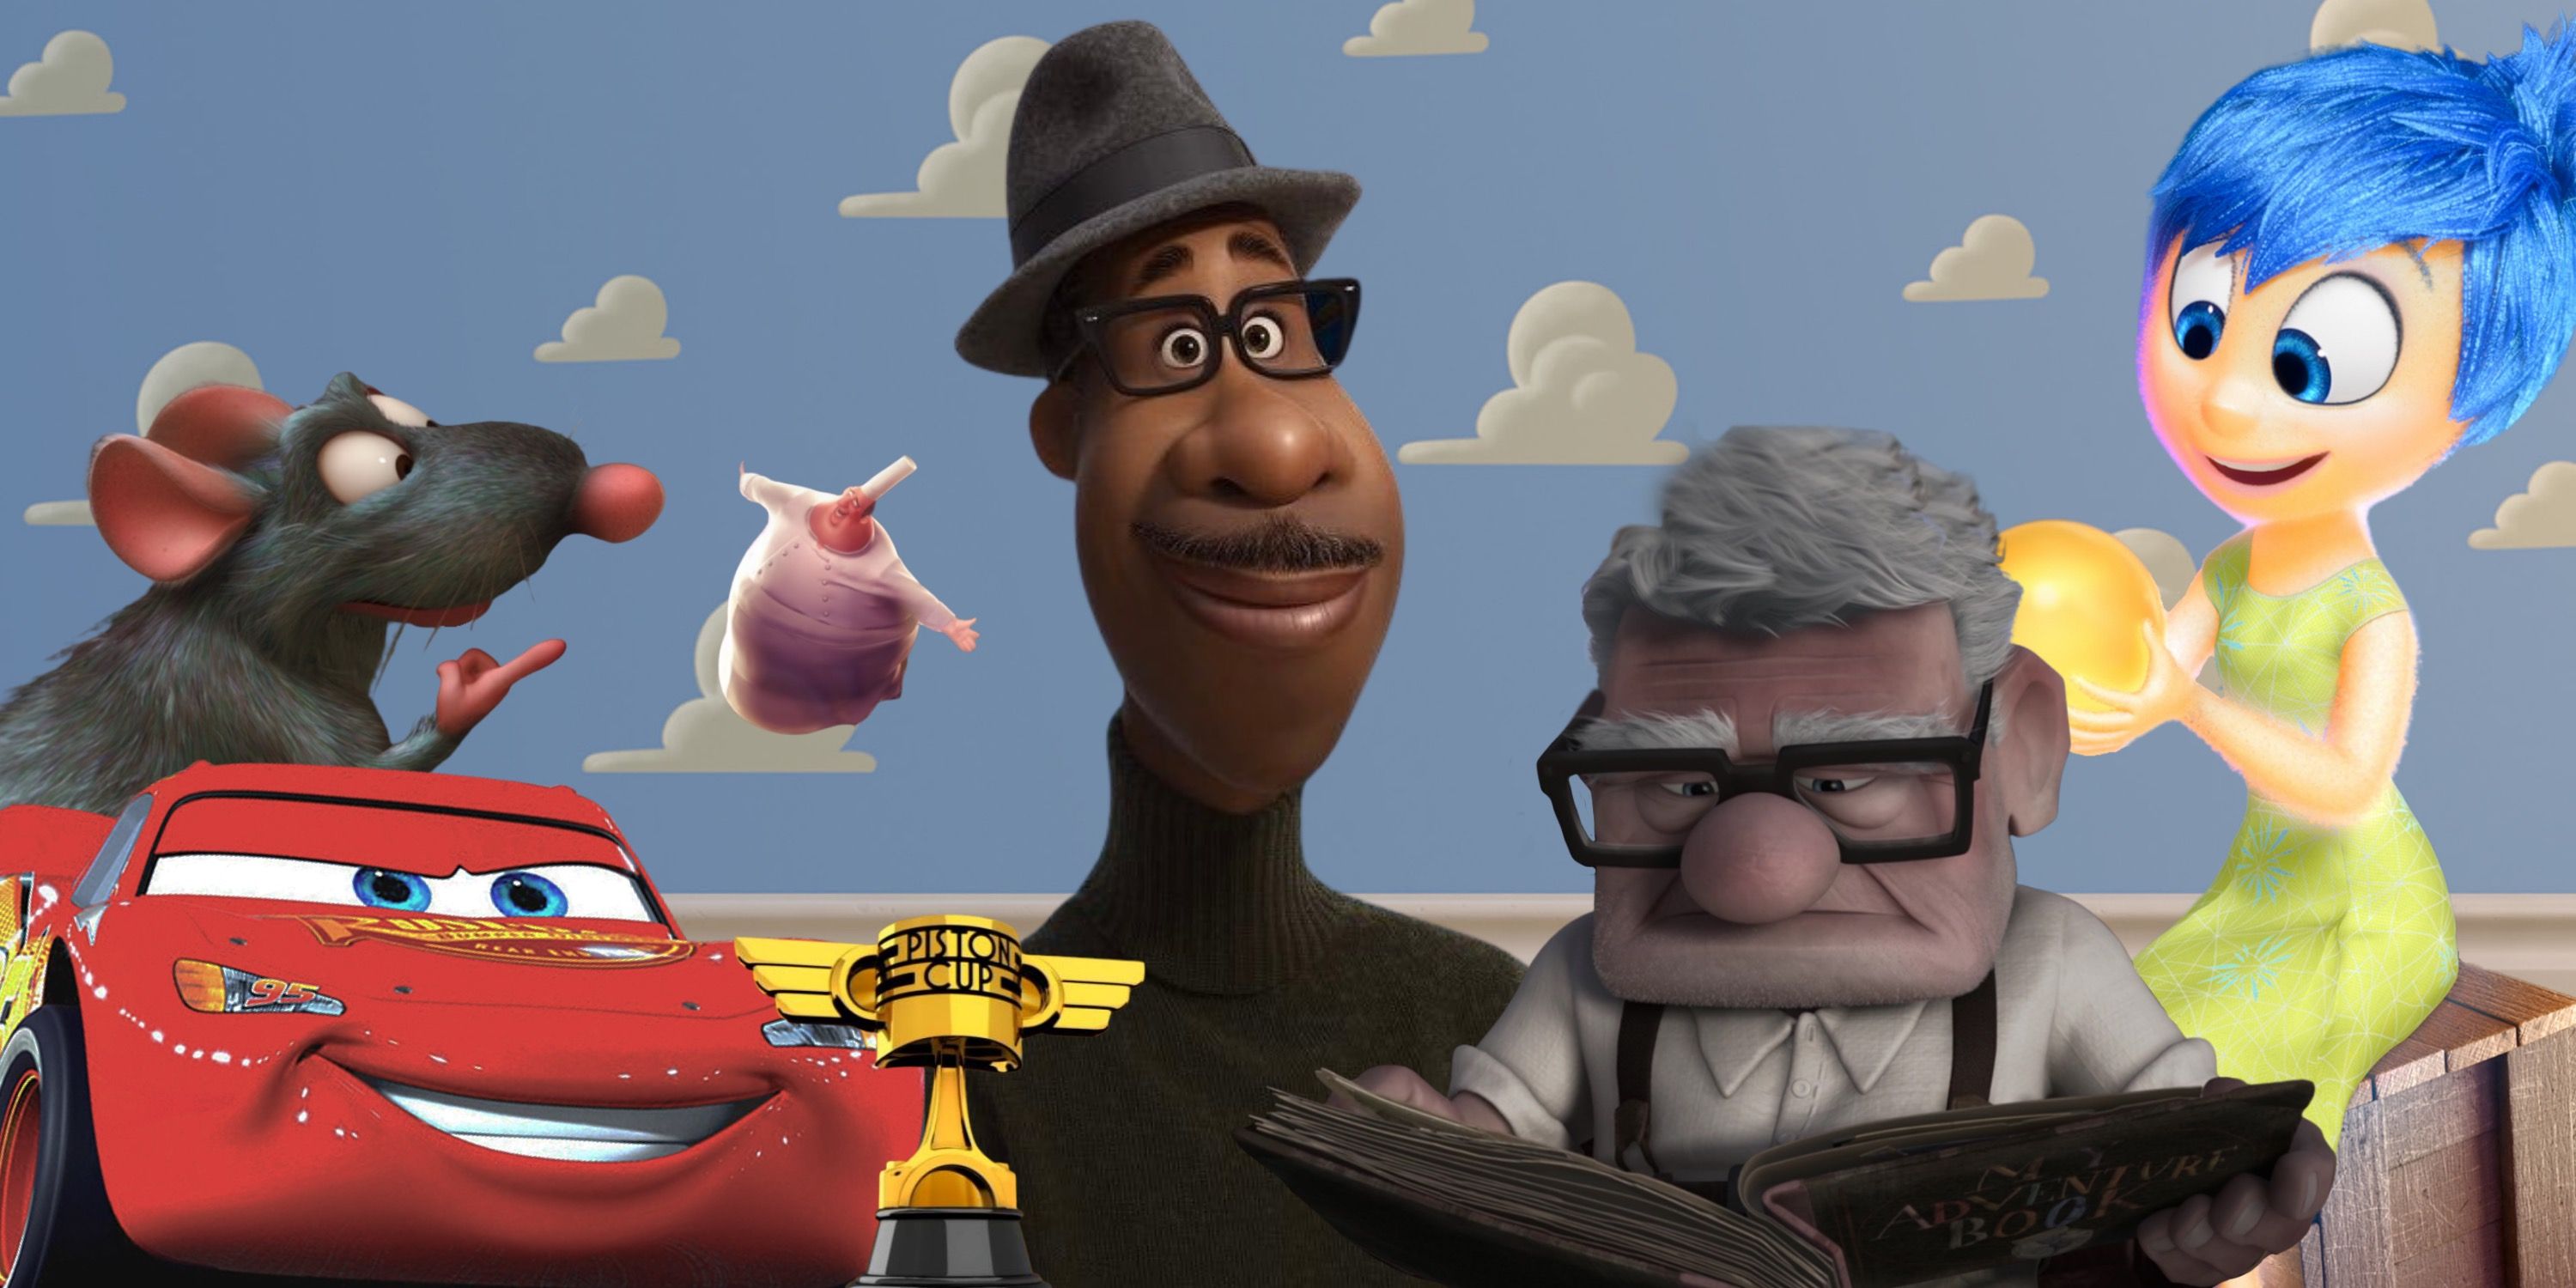 Soul Isn’t An Adult Movie (You Just Don’t Get Pixar)